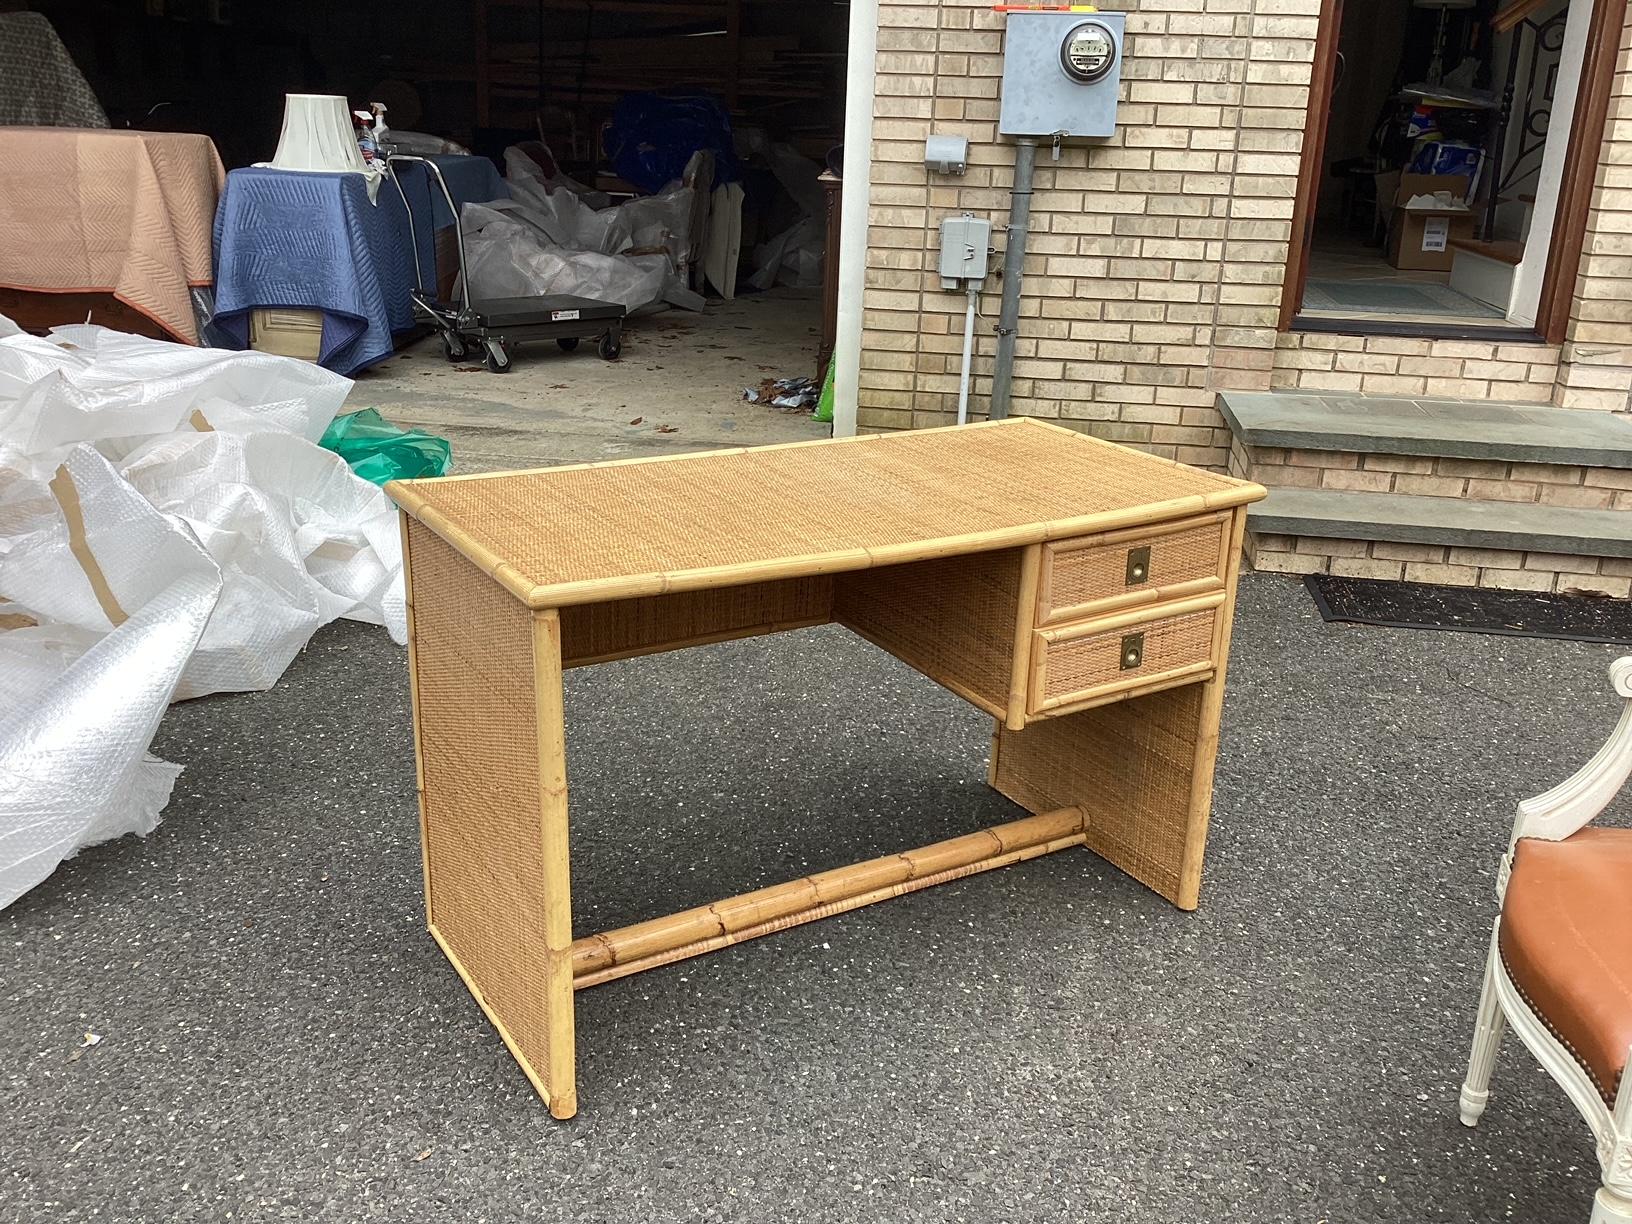 This is a classic French rattan writing desk having clean, modern lines and large workspace. The sides are full rattan panels. There are bamboo accents around the drawers and a full bamboo bar across the bottom of the desk. TThe color is natural and